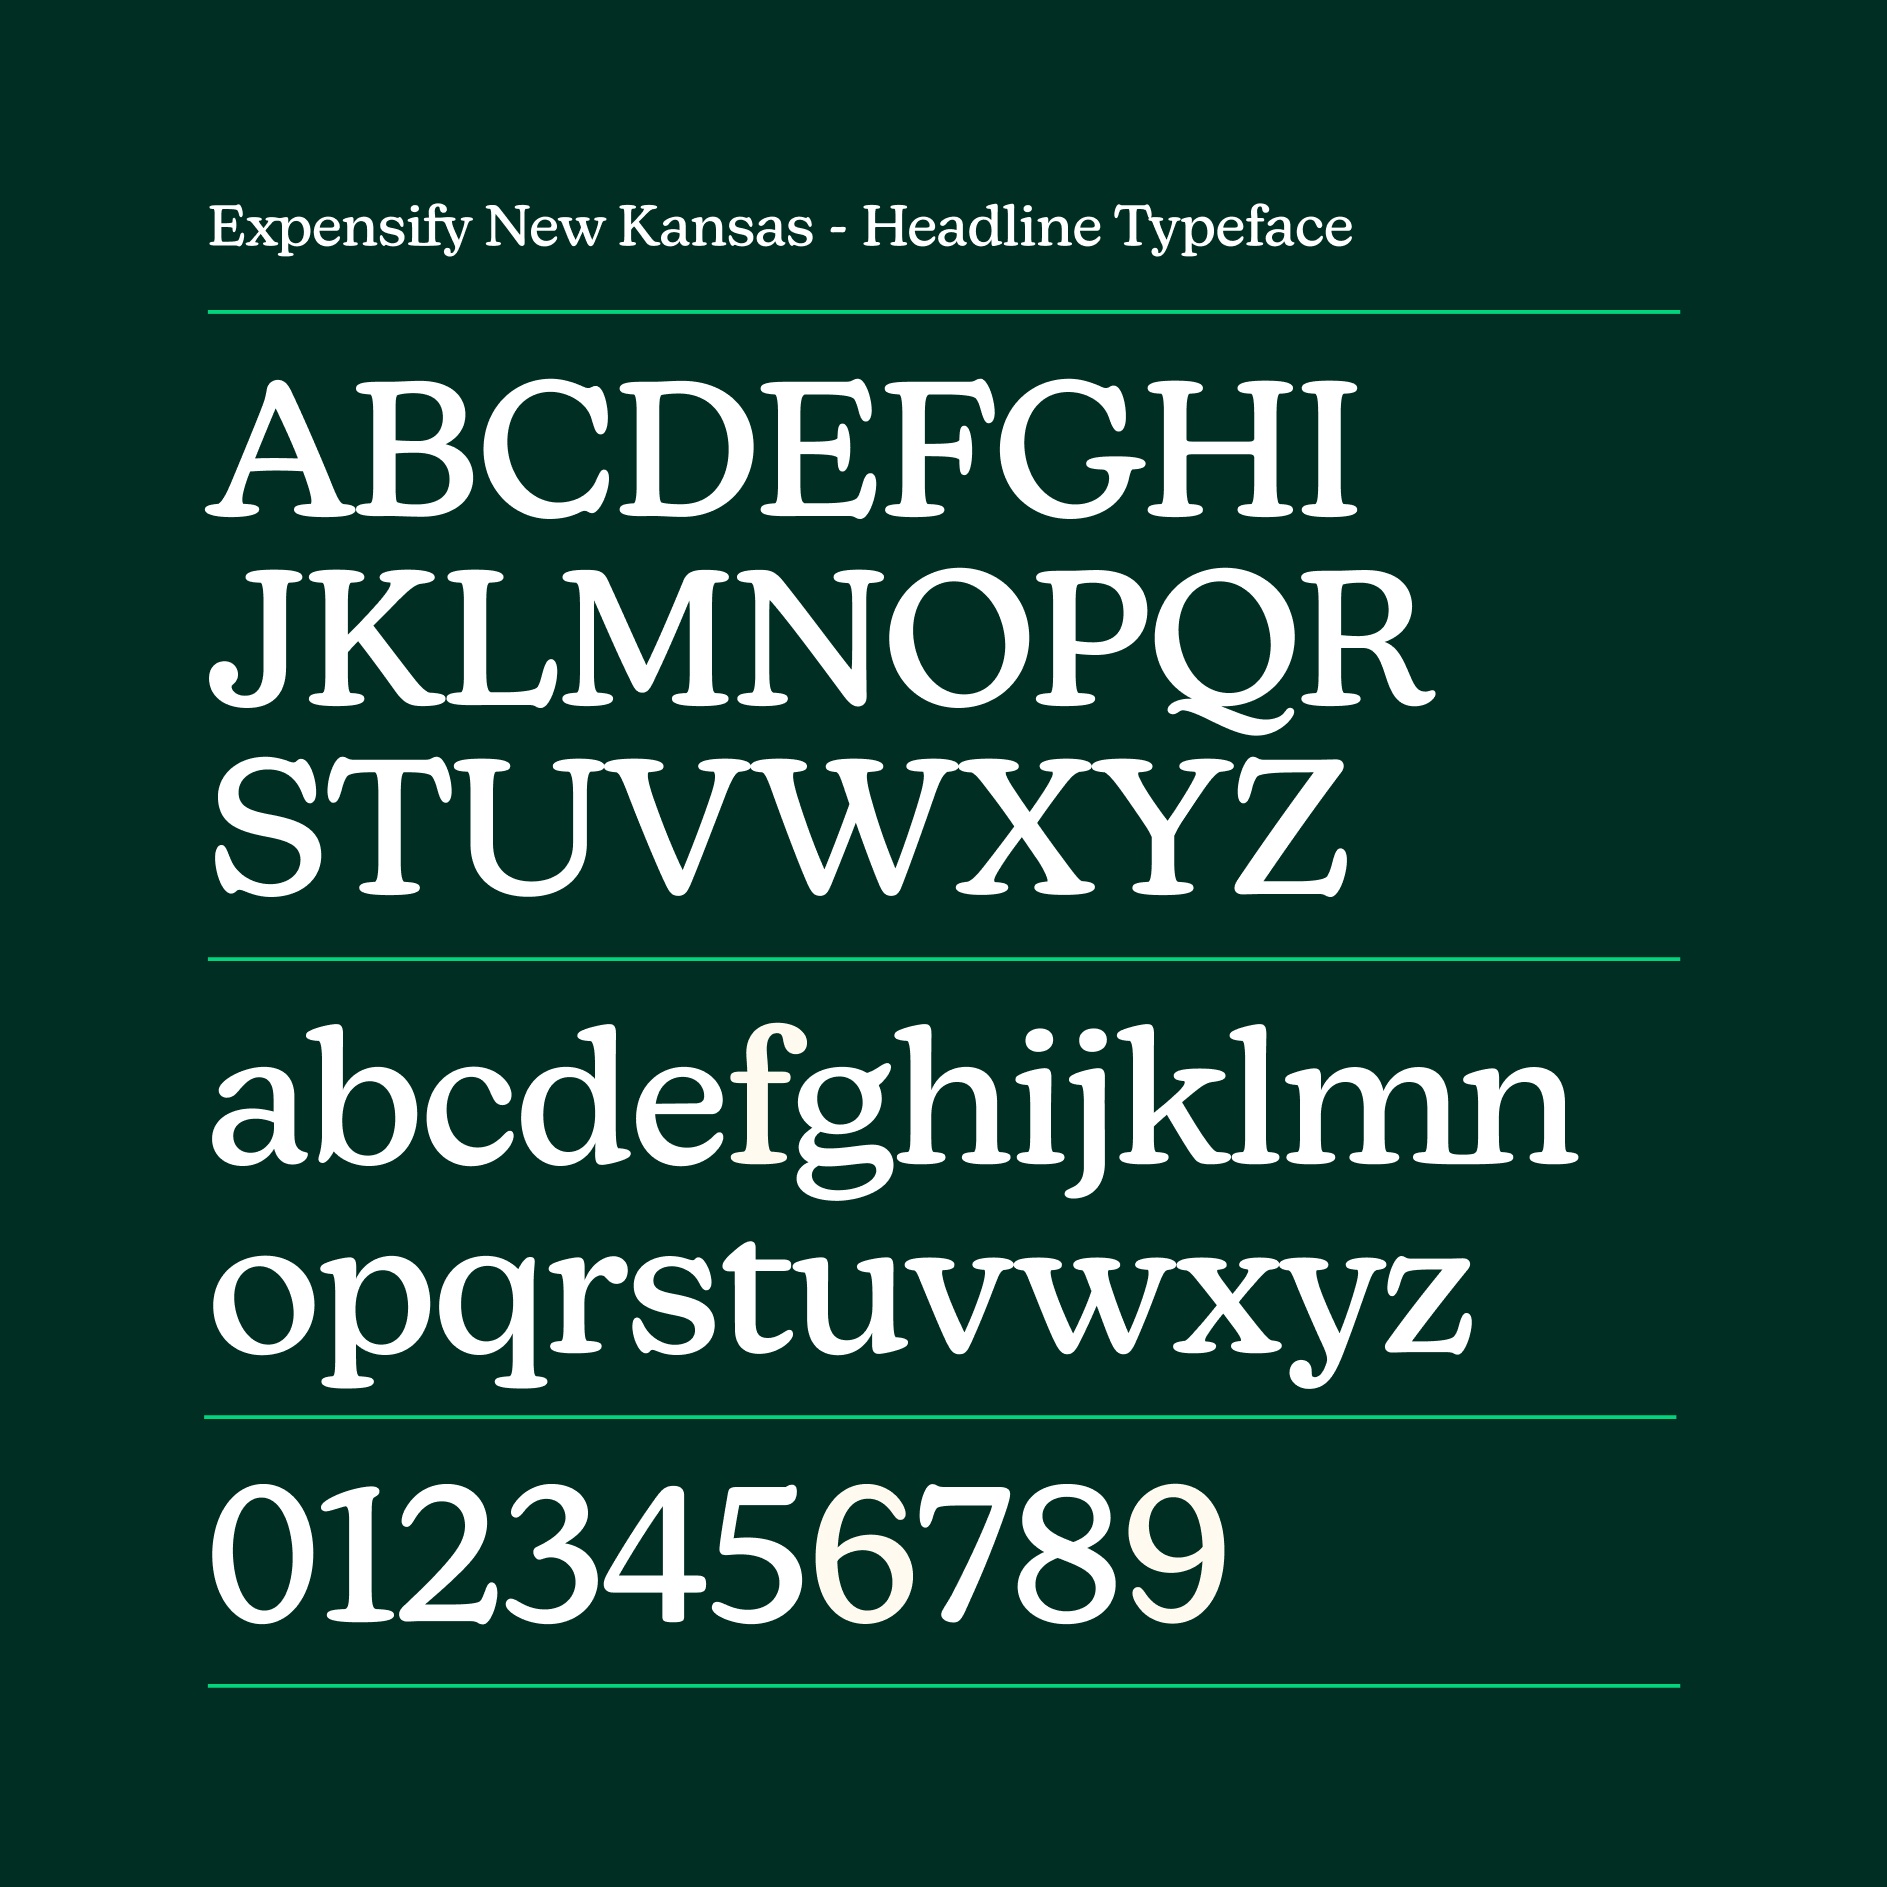 Example letterforms and numbers from the custom Expensify New Kansas typeface.